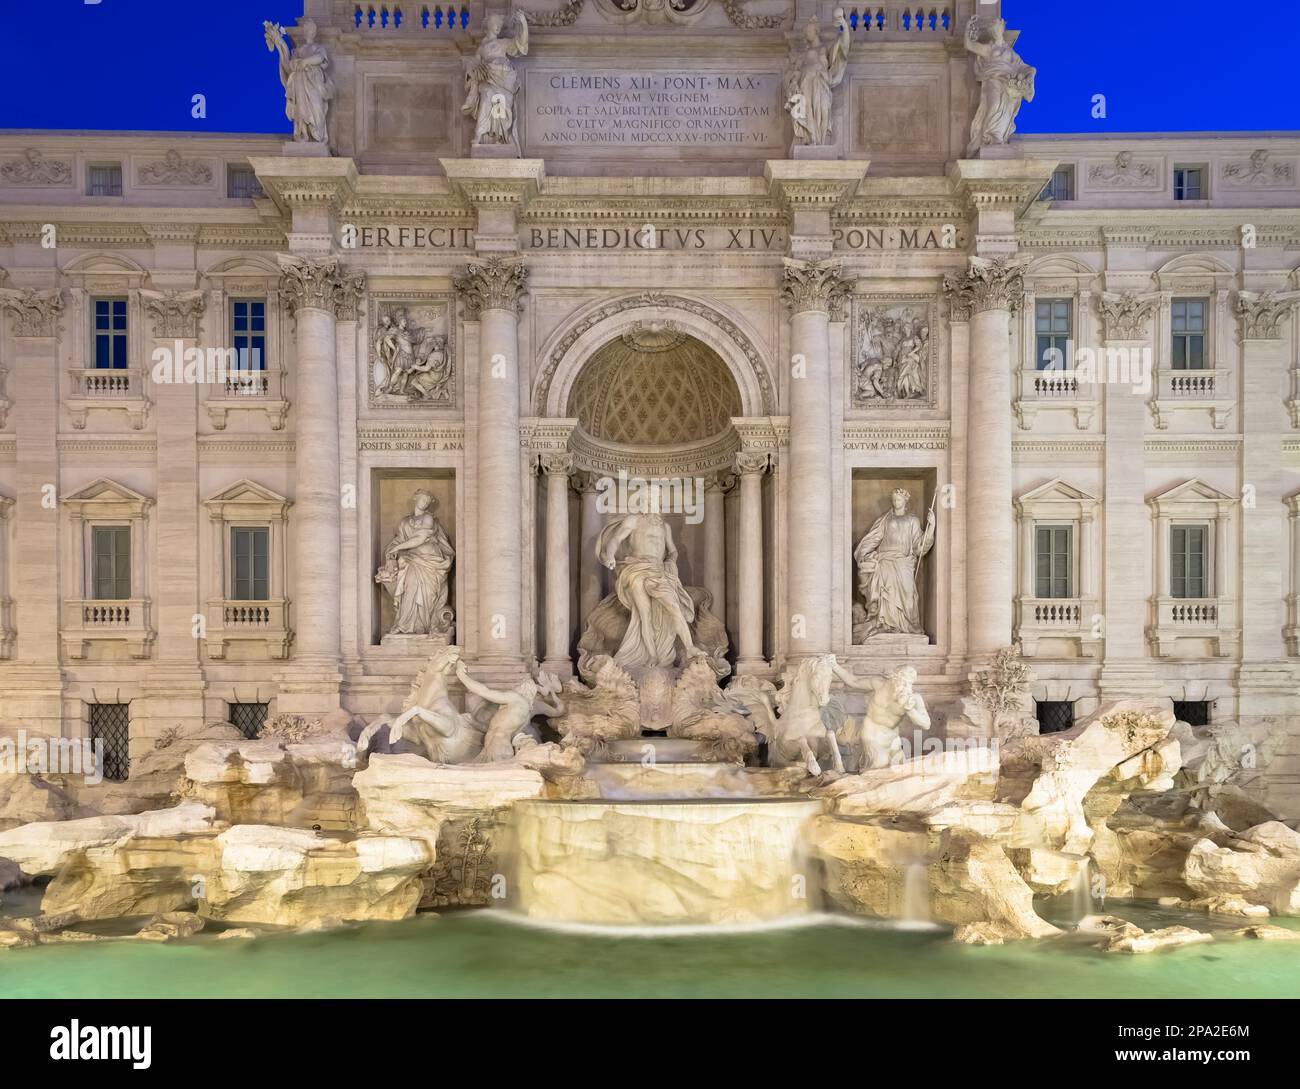 Rome, Italy. Trevi fountain at night, the masterpiece of Italian classical baroque architecture Stock Photo